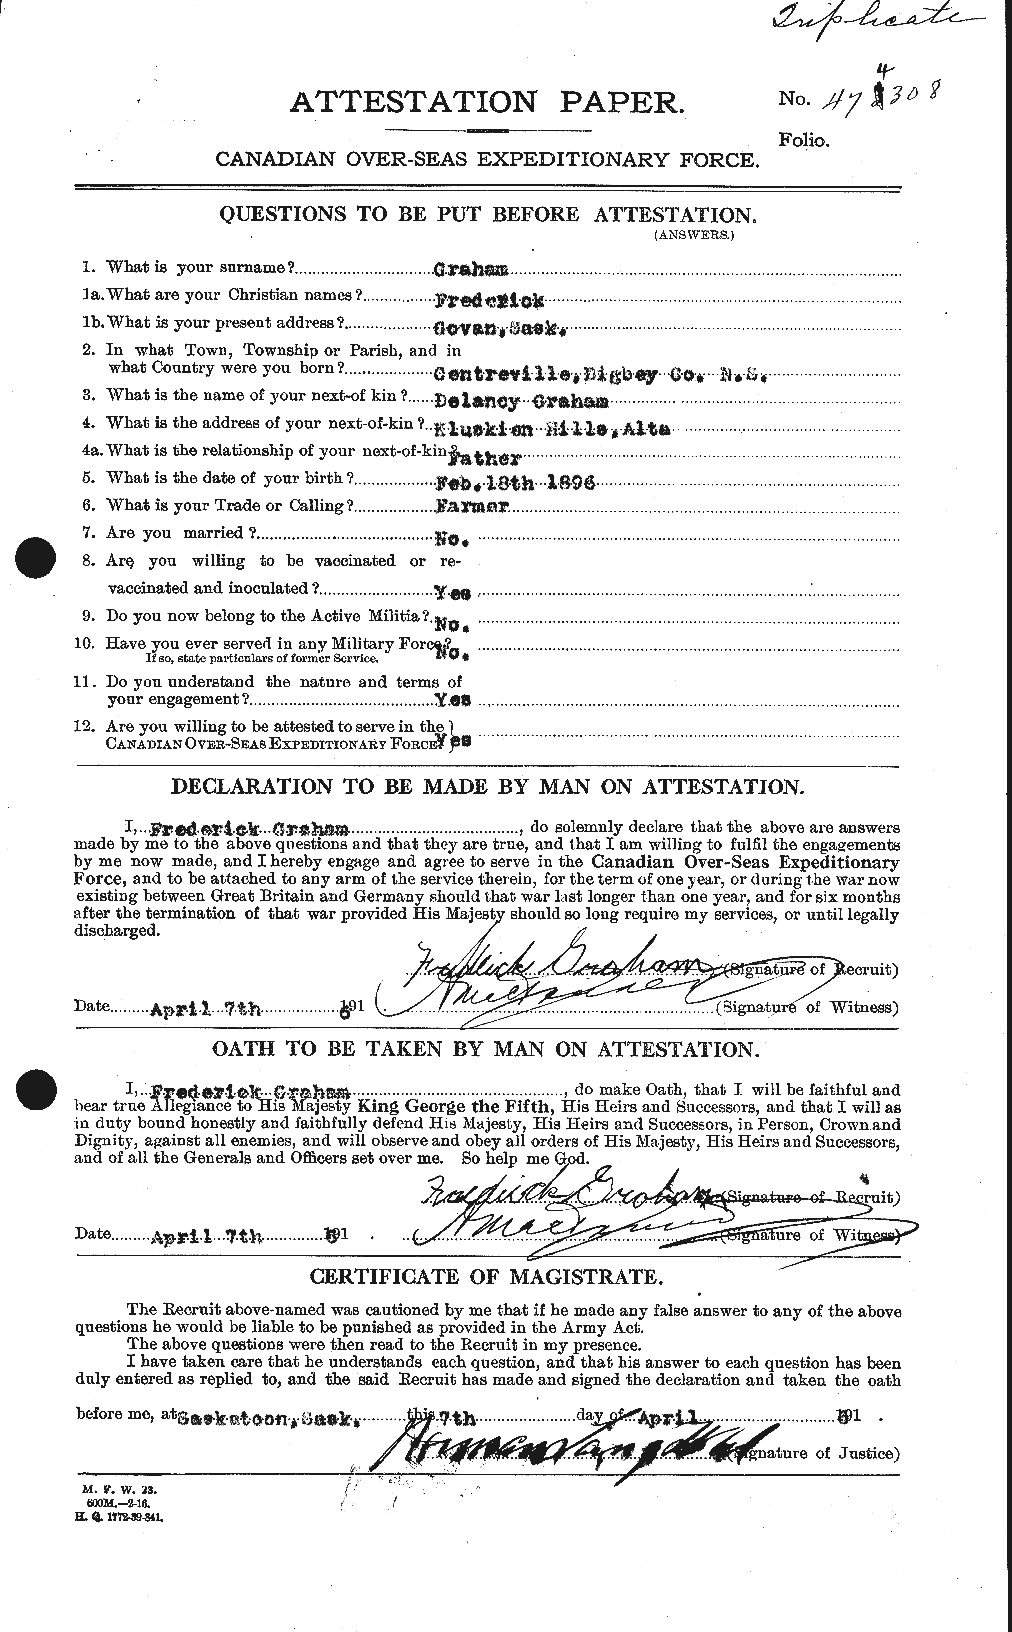 Personnel Records of the First World War - CEF 357604a